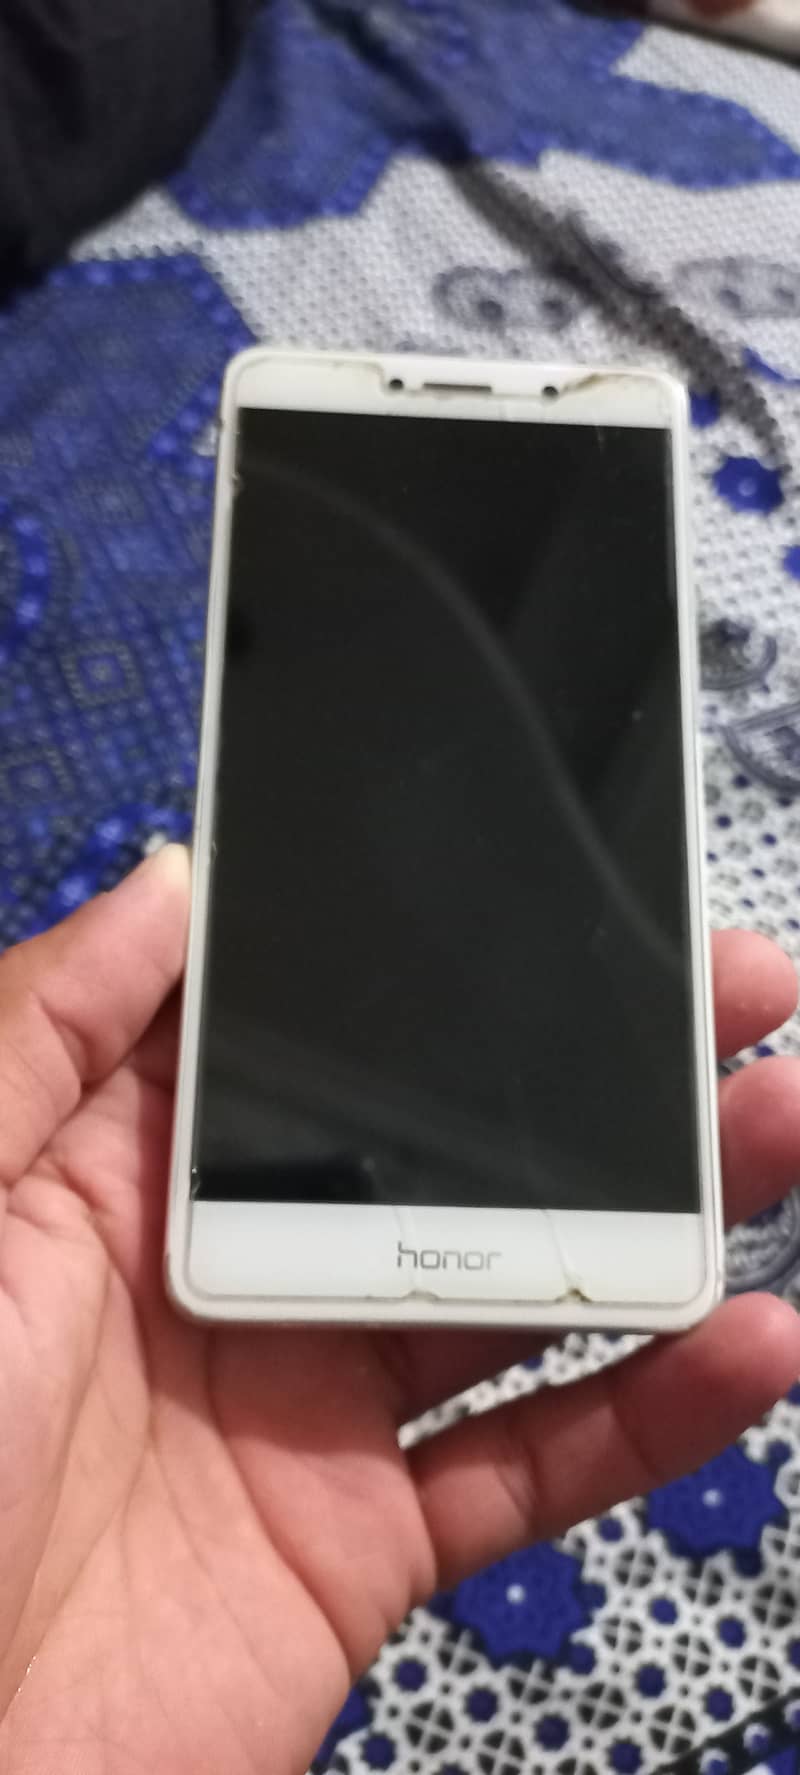 Huawei Honor 6x storage 3/32 for sale in good condition 6